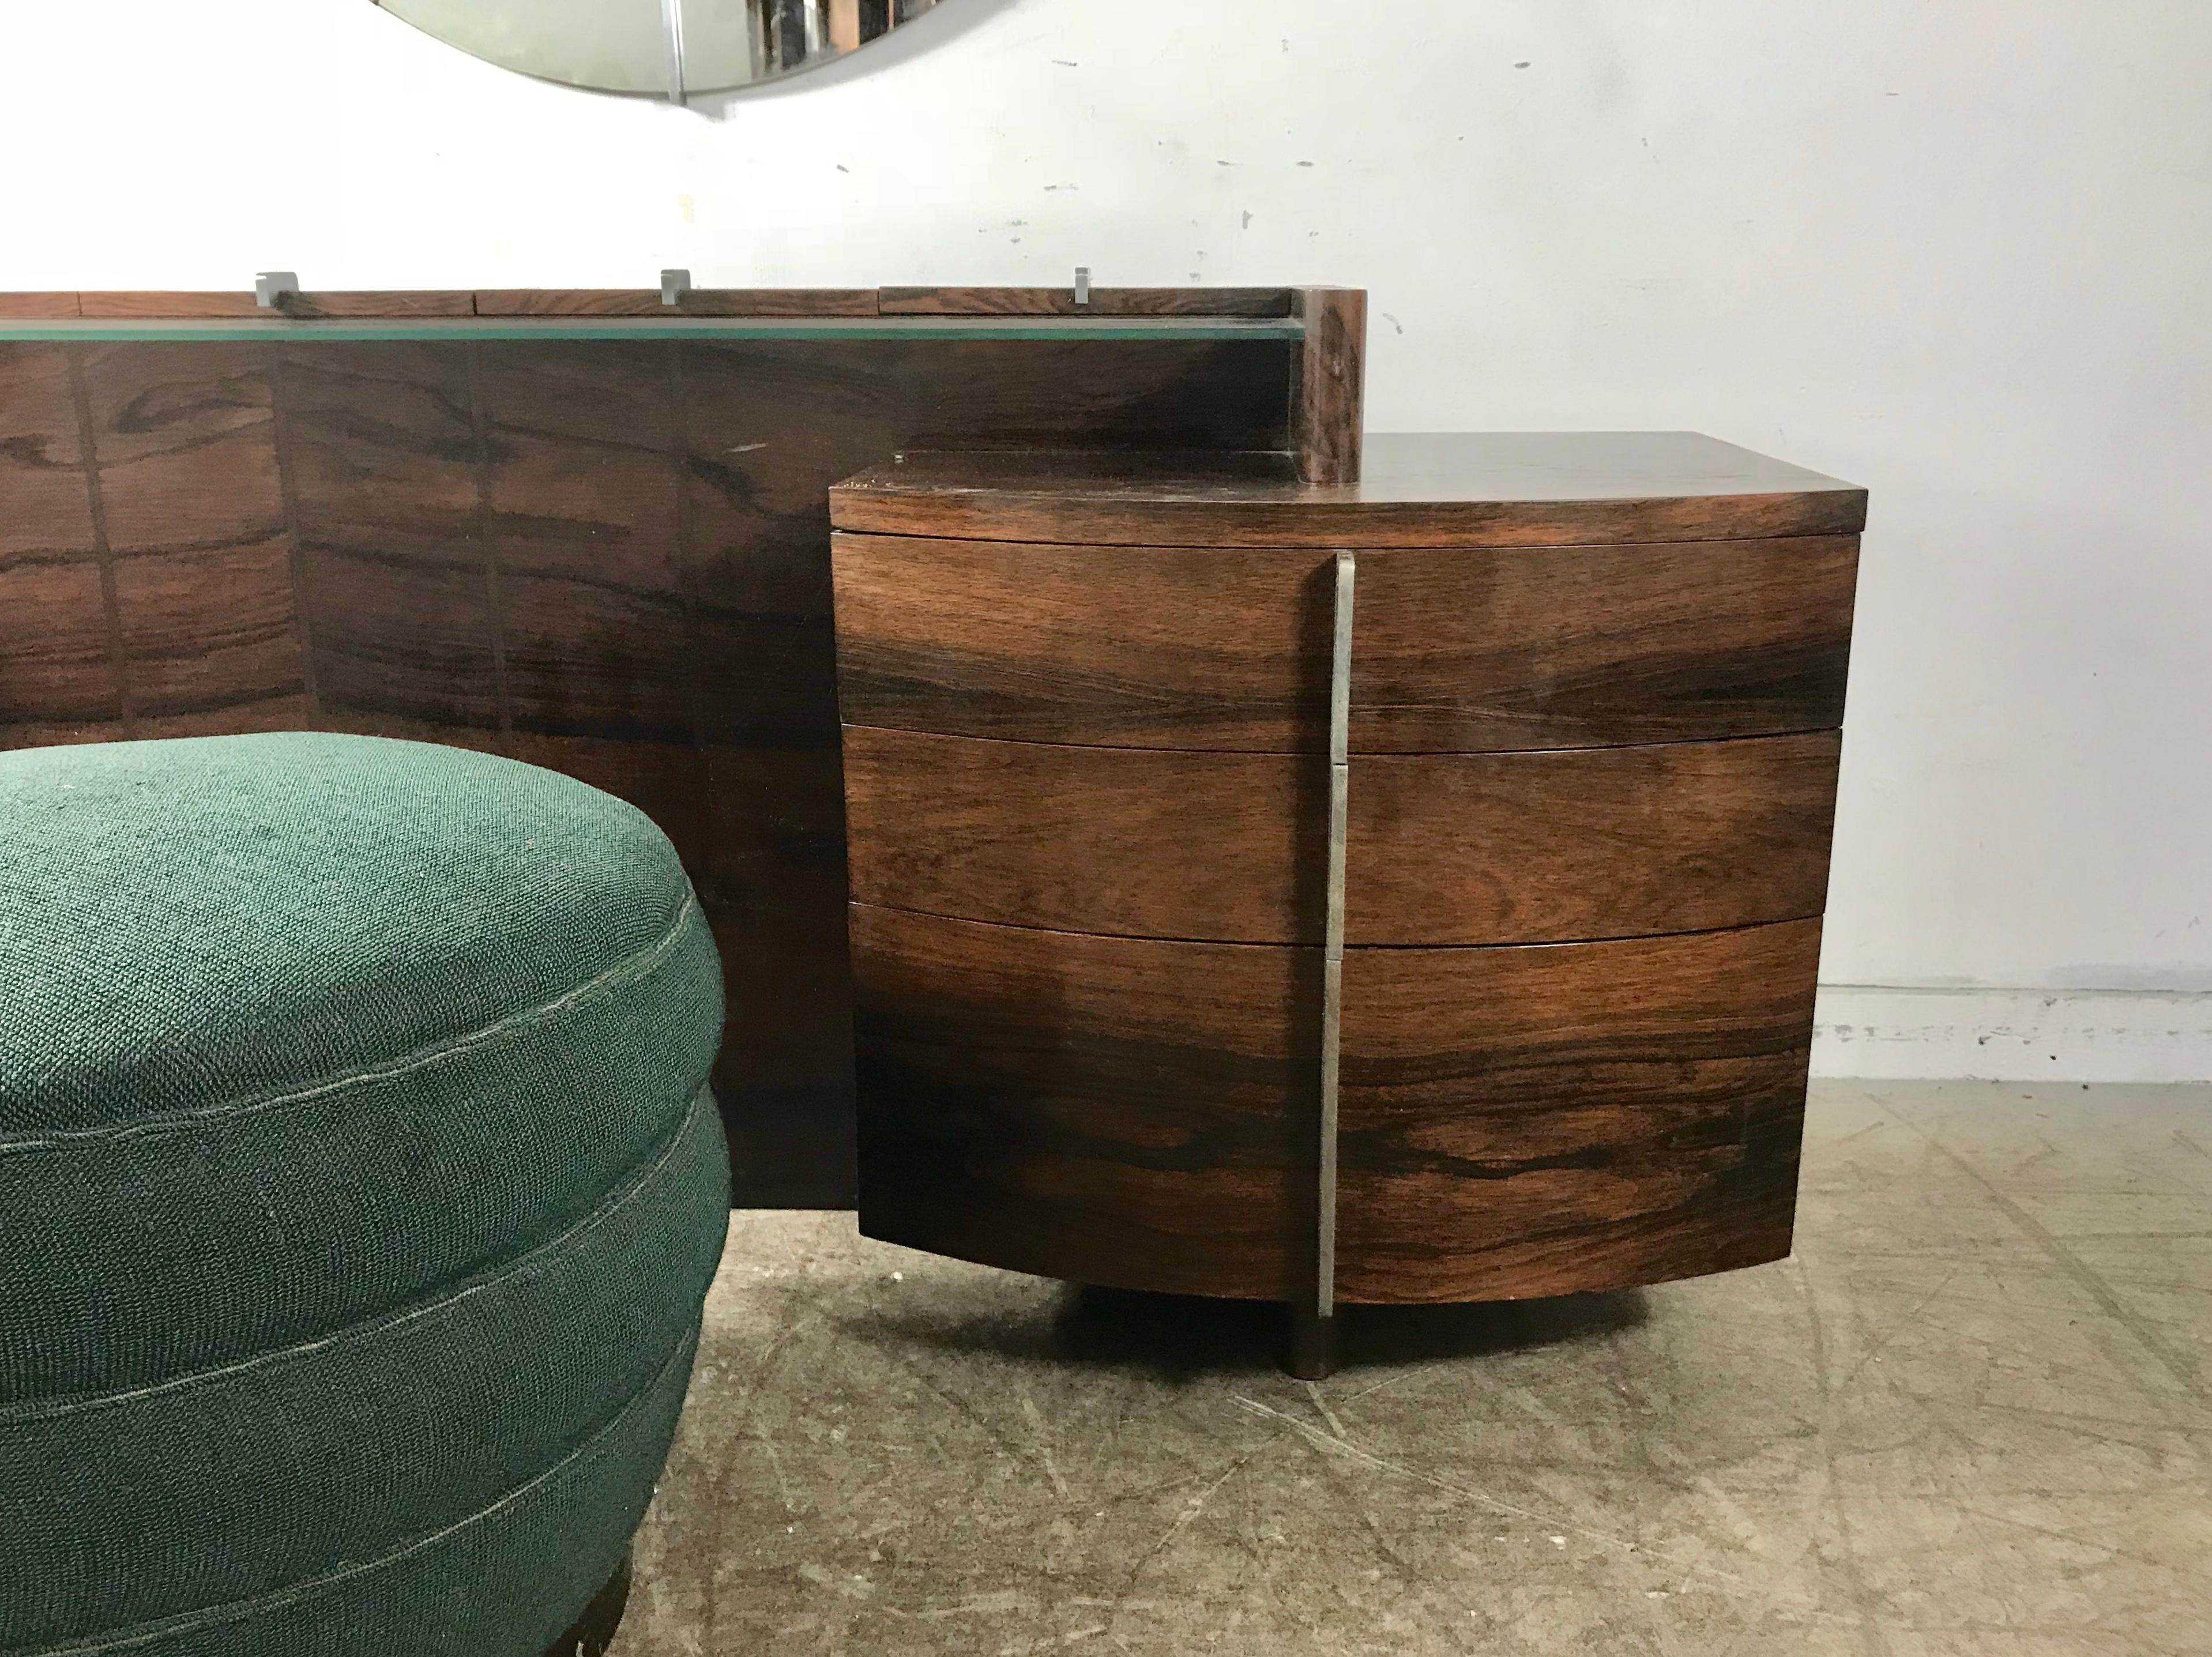 Stunning and quite rare Gilbert Rohde Art Deco rosewood dressing table, pouf and mirror, purchased recently from an amazing estate, folks originally purchased new from Herman Miller showroom in 1937..Vanity features bookmatched rosewood, with four